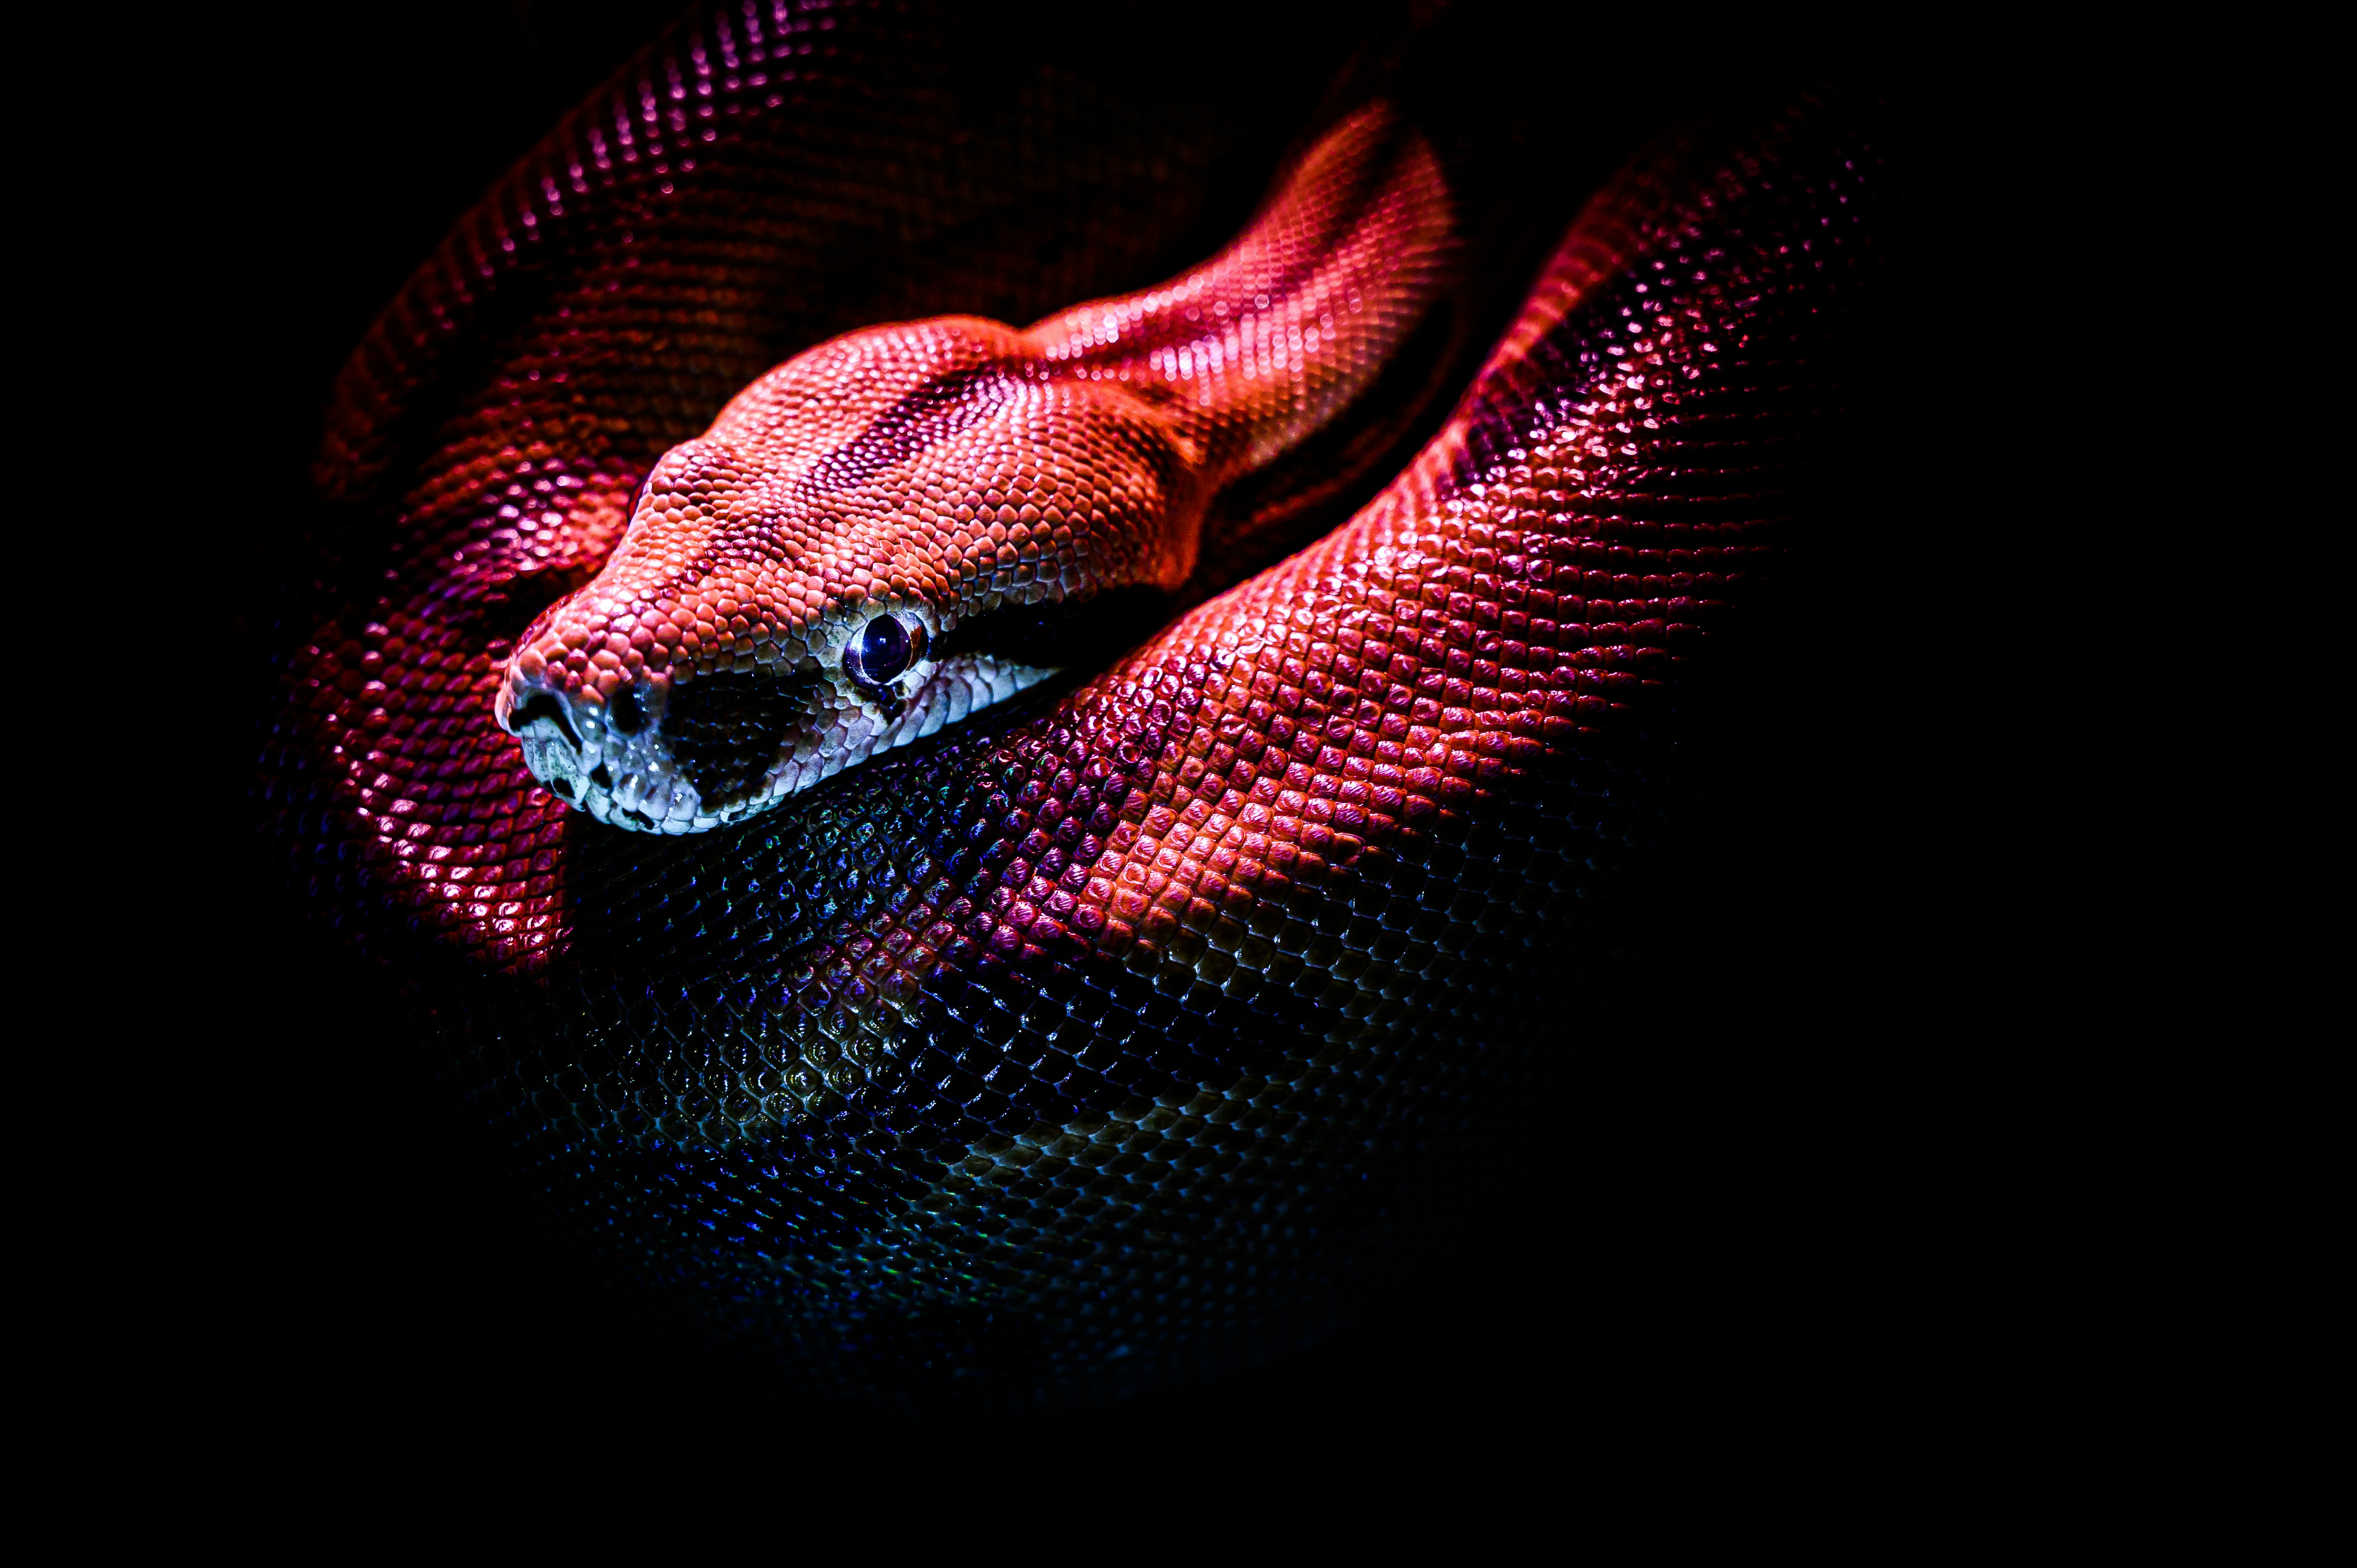 Boa constrictor in the night - snake, reptile, pet